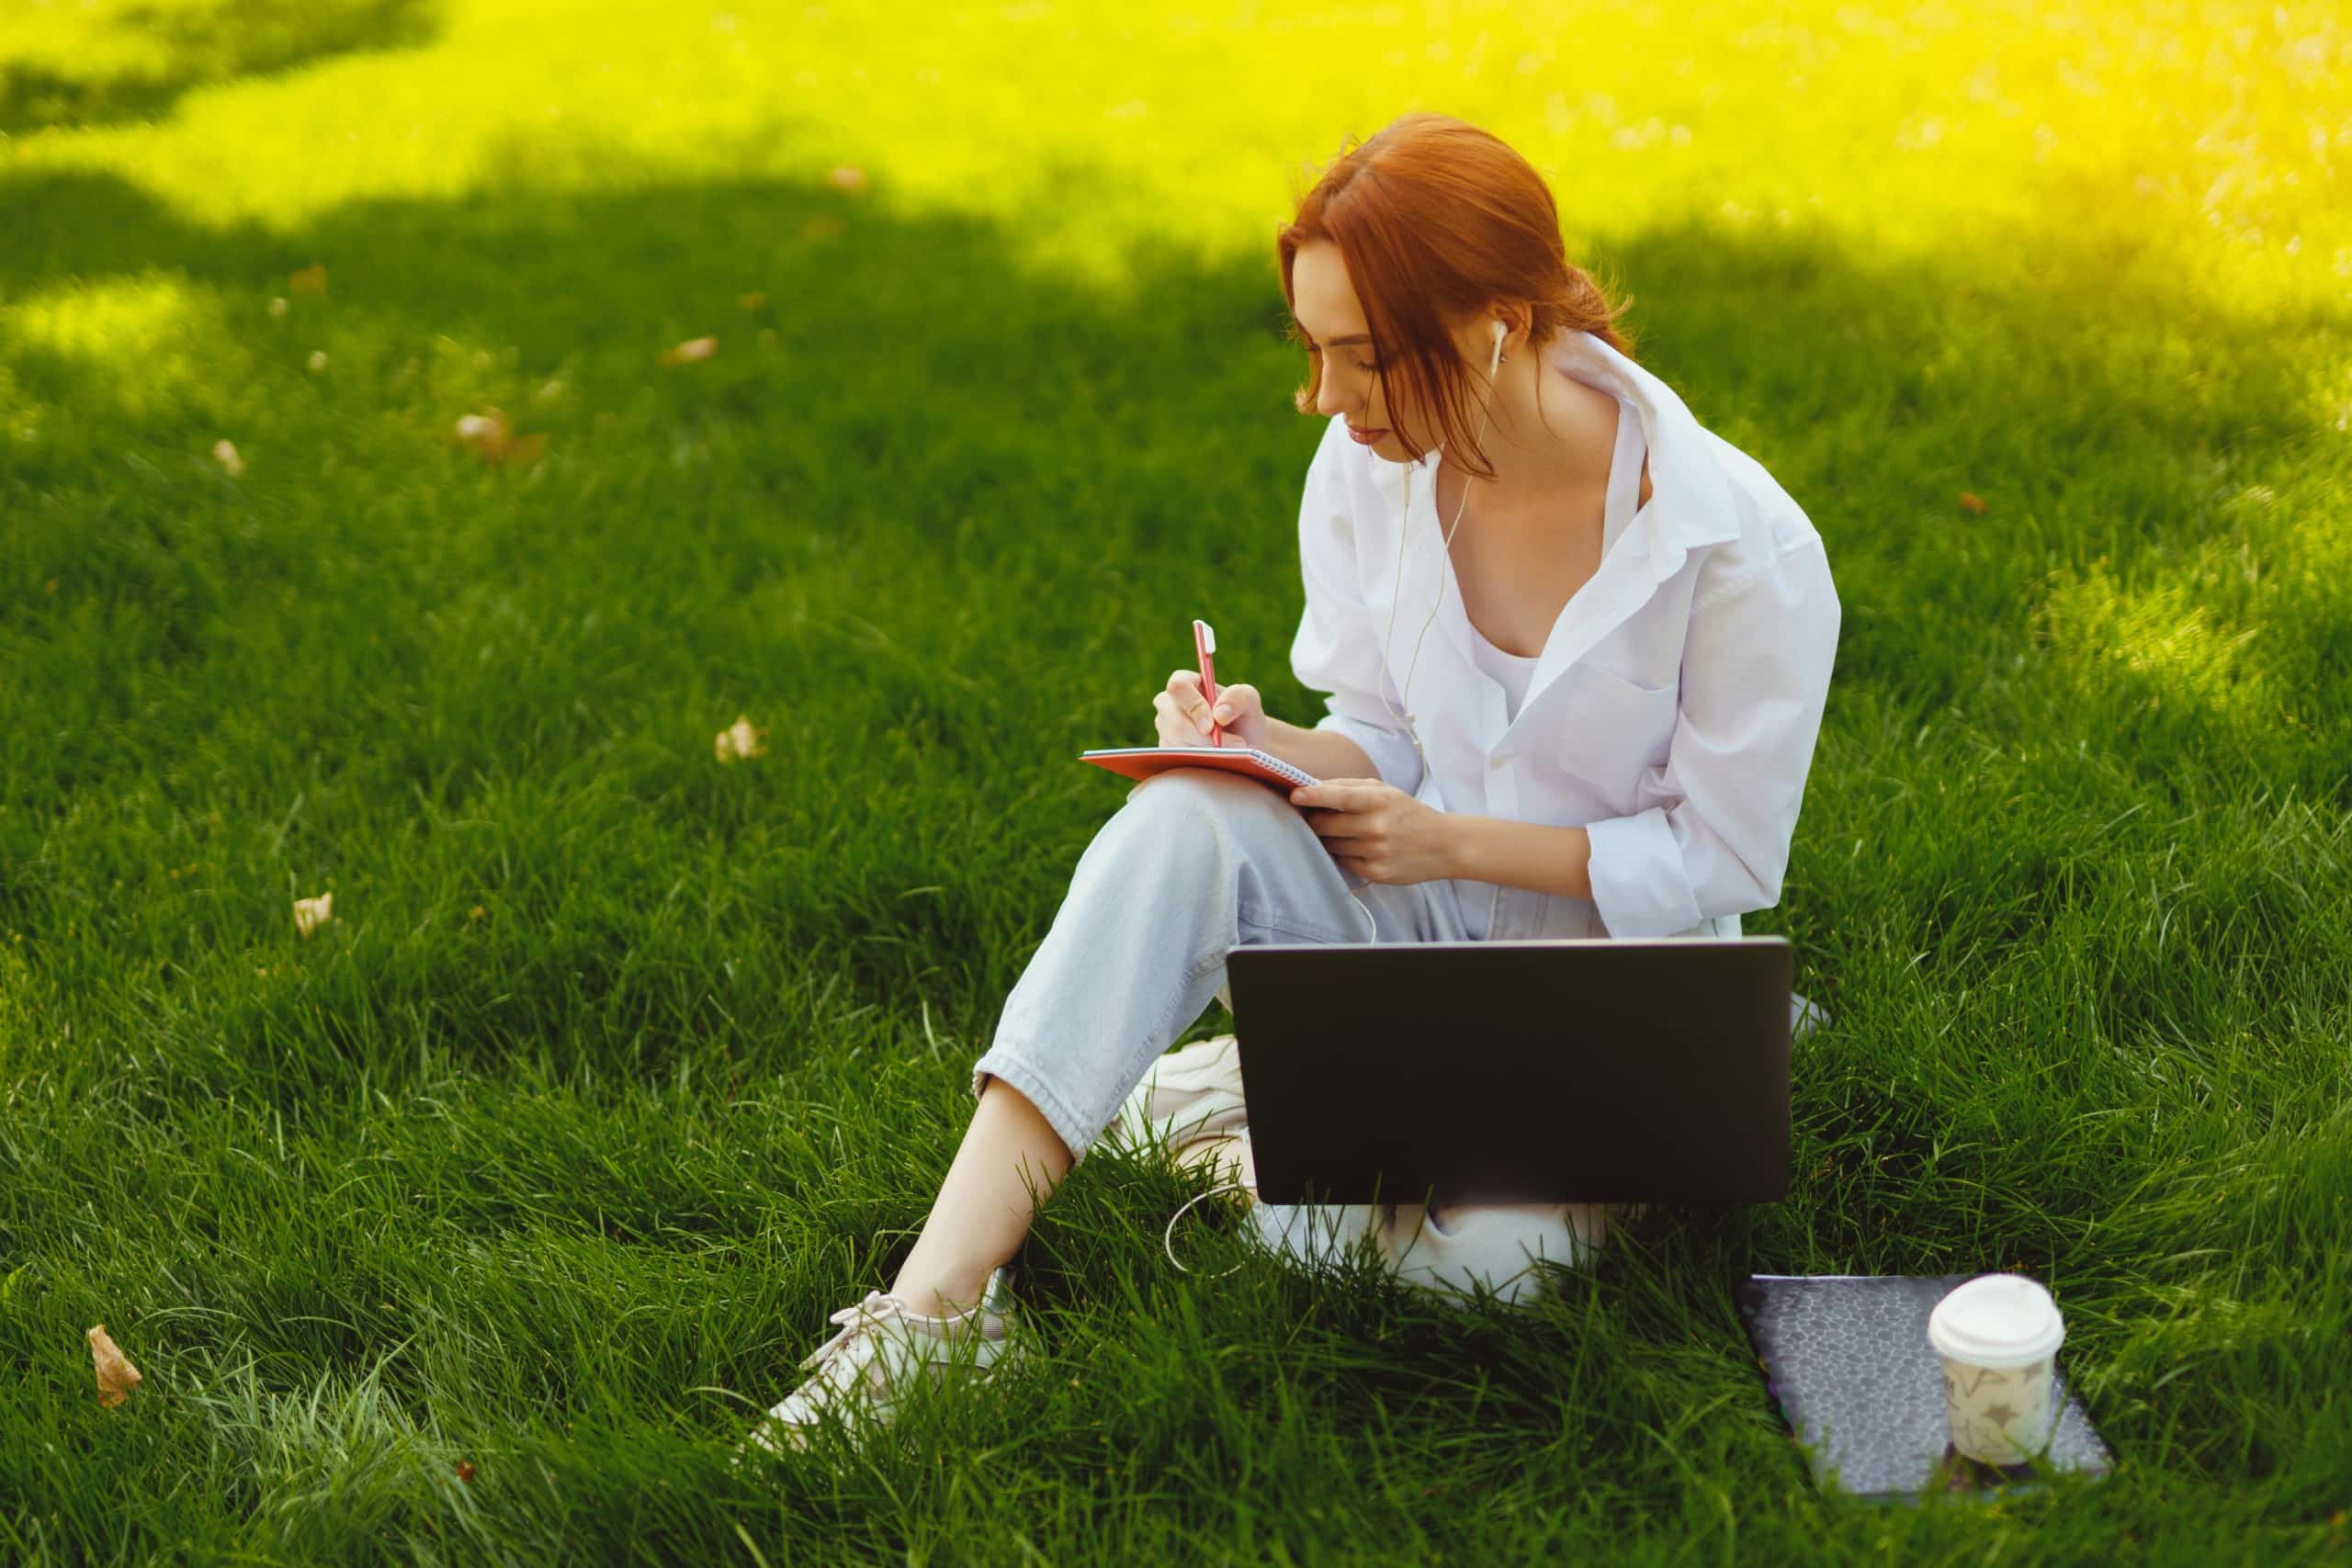 Beautiful young redhead in park outdoors writing in her notebook, while seated on the grass.